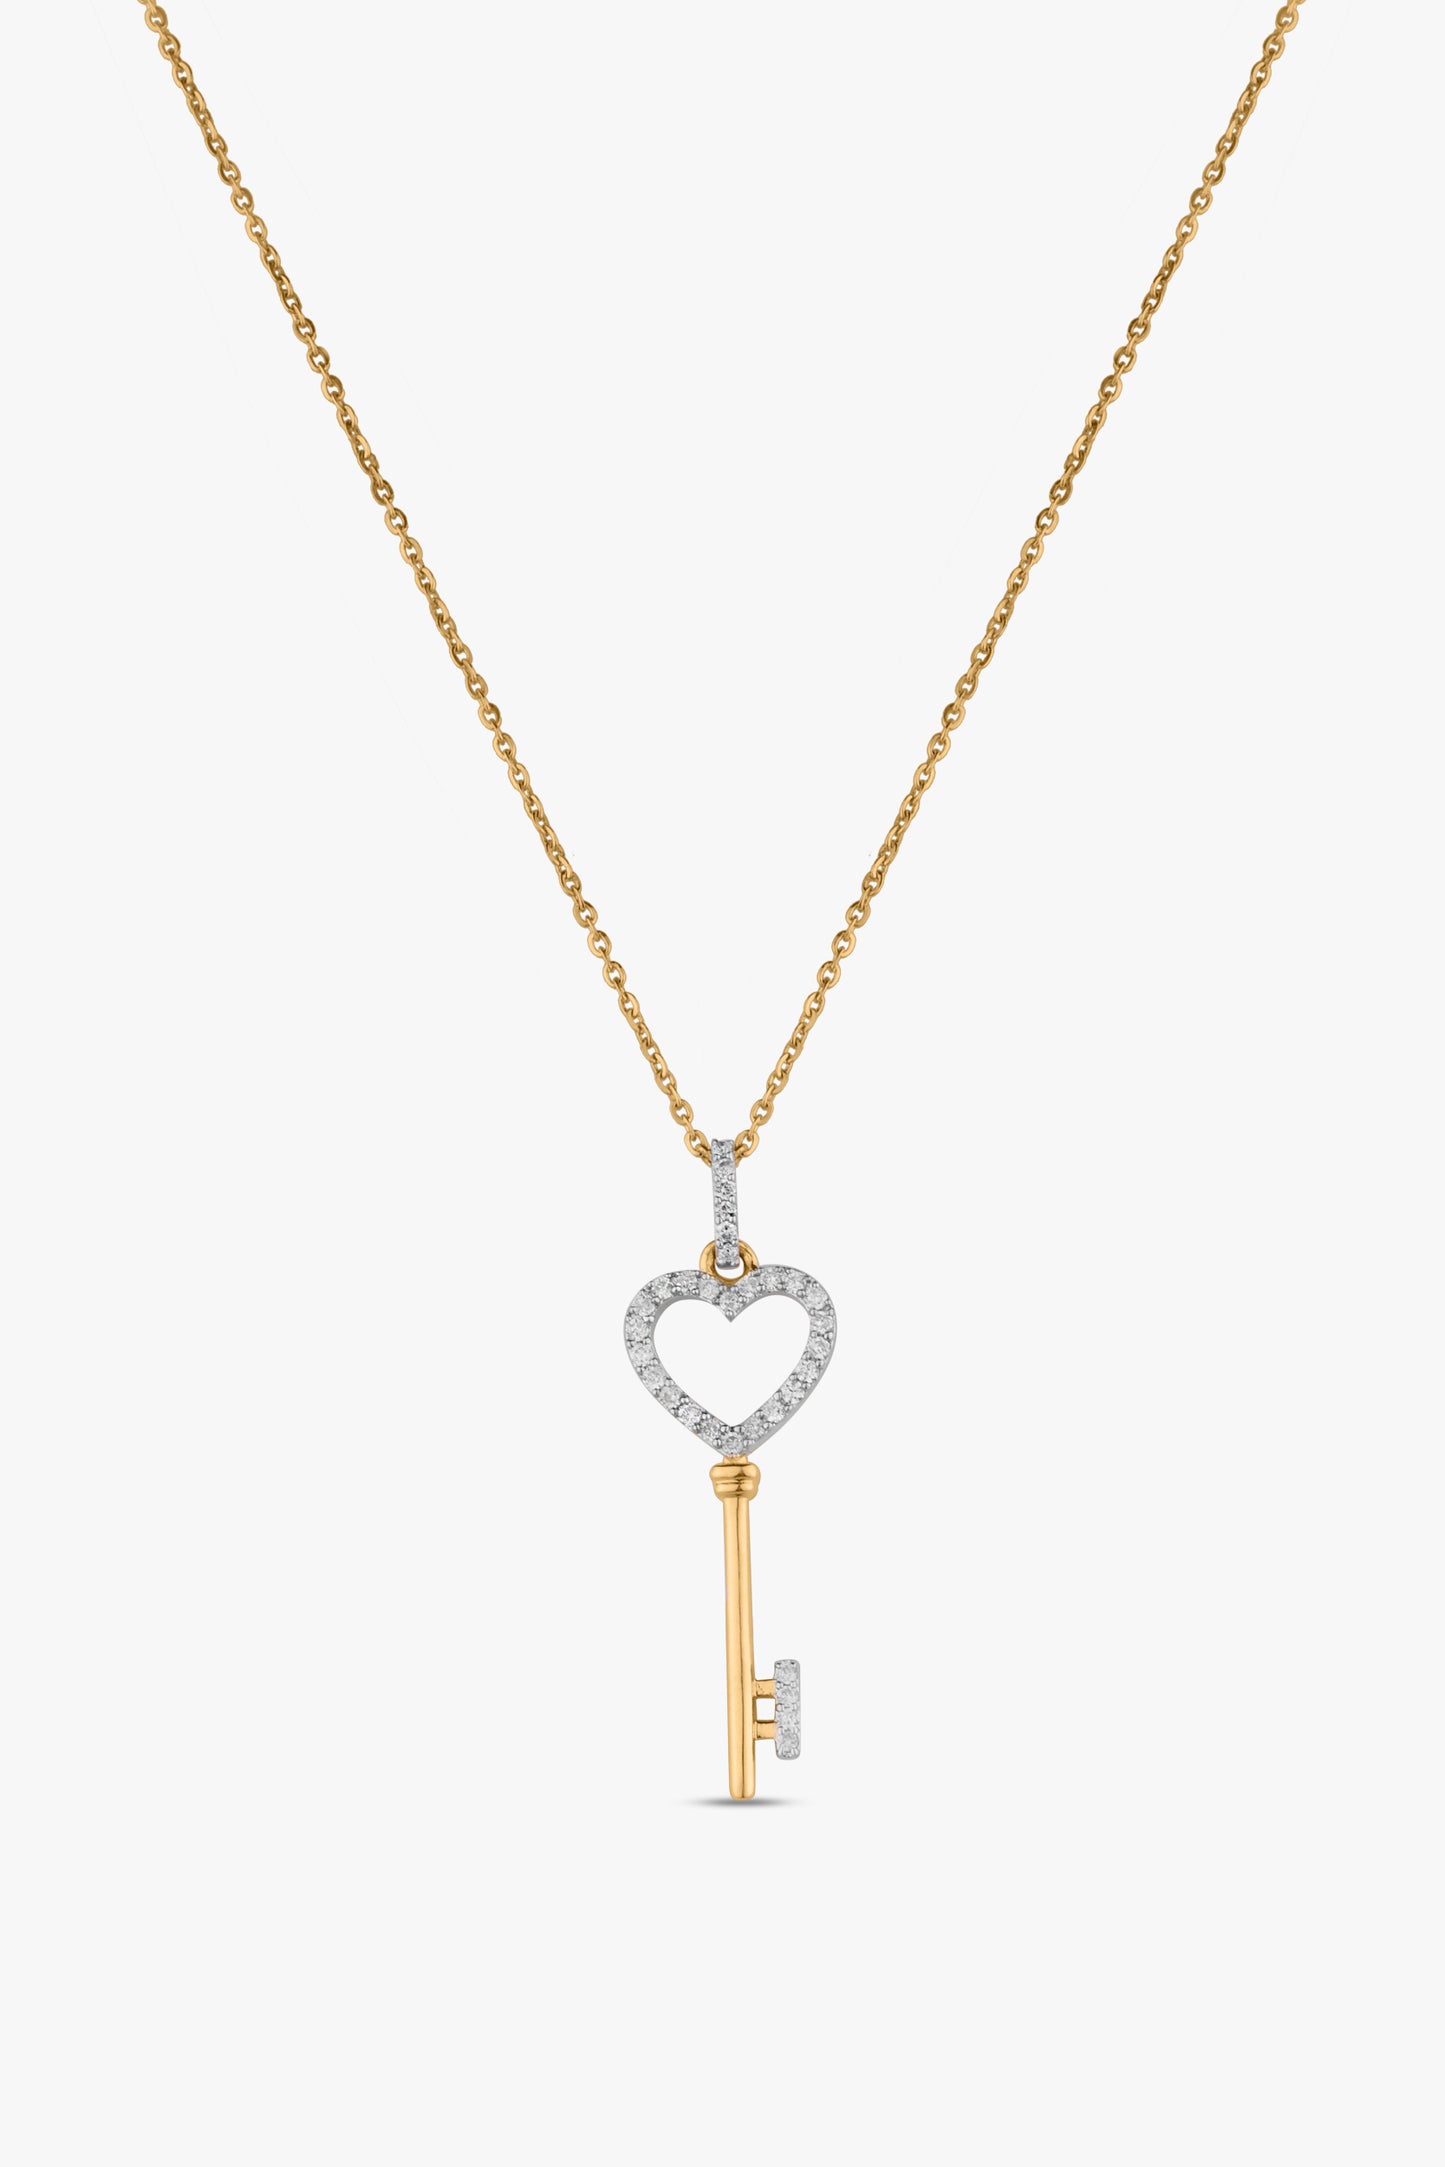 Key To Your Heart Necklace